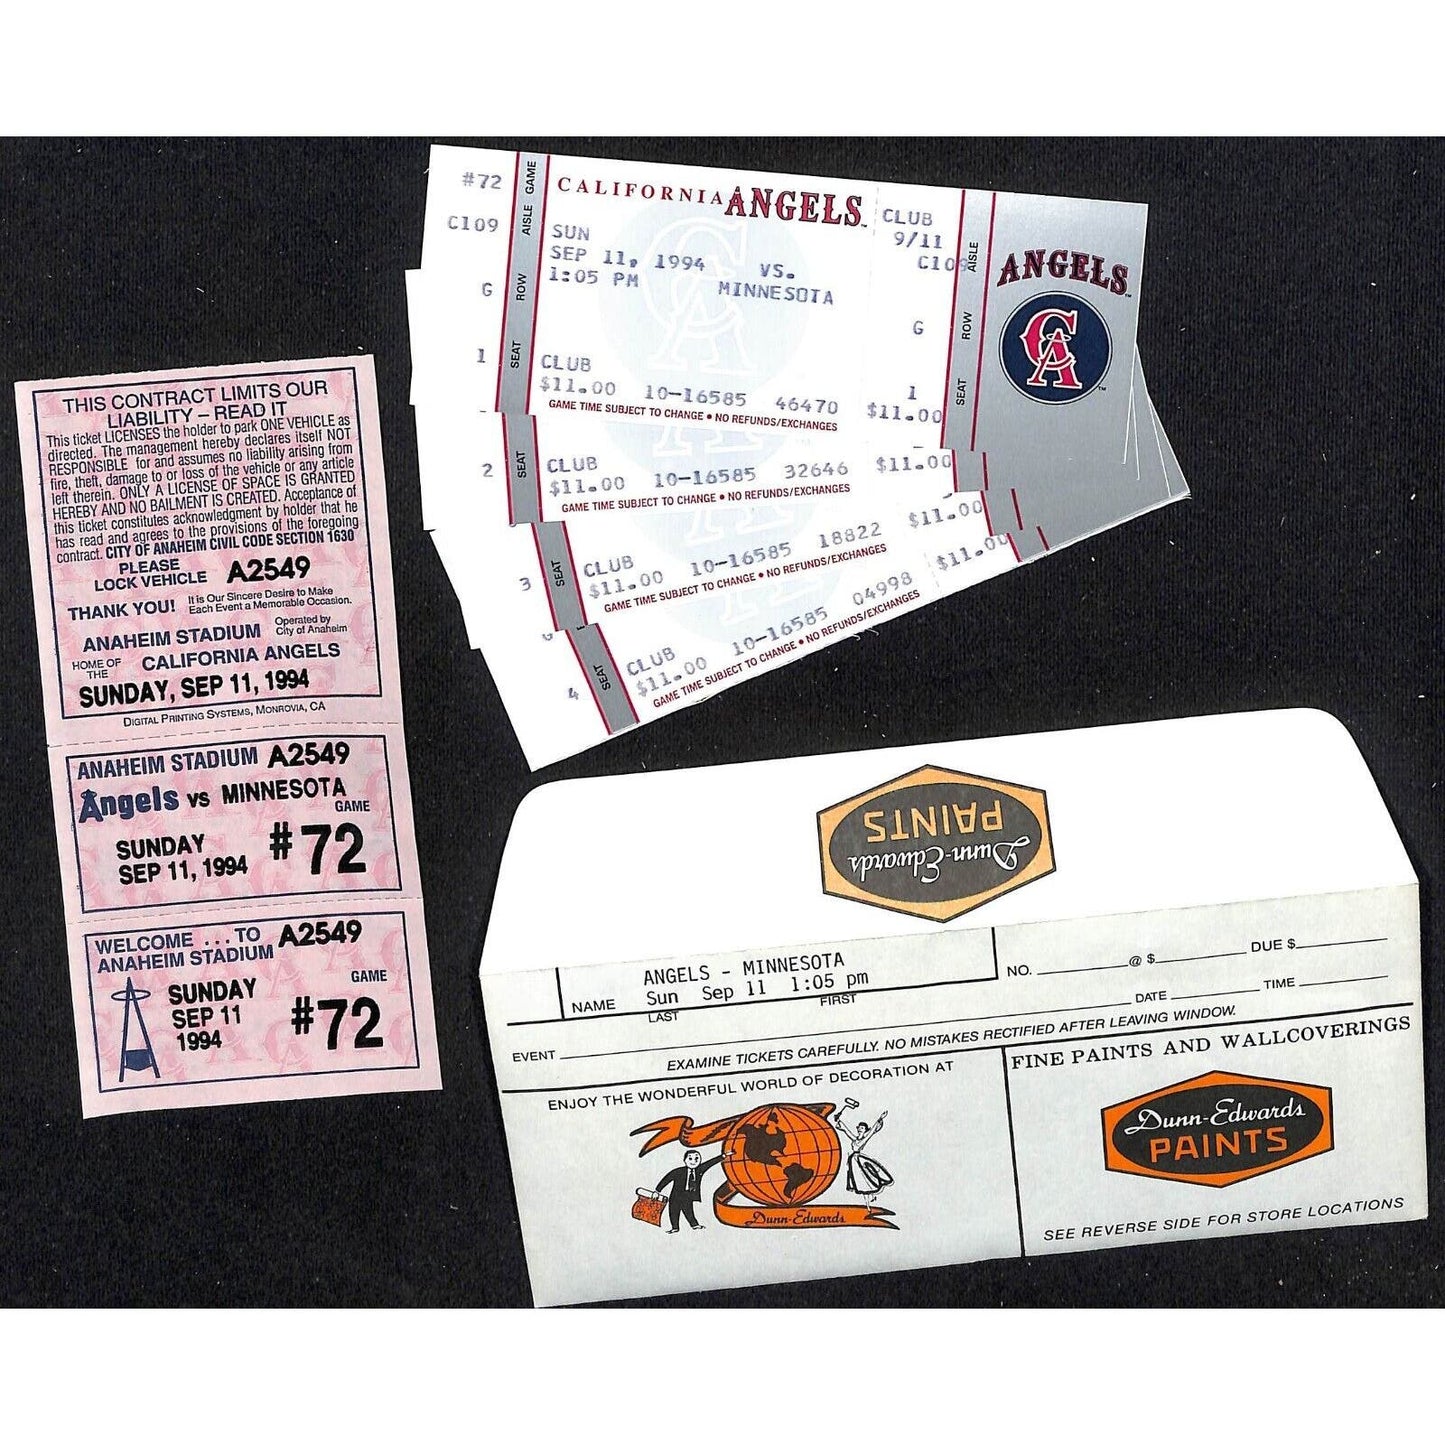 California Angels Tickets - 4 Unused 9/11/94 Strike - Game Not Played